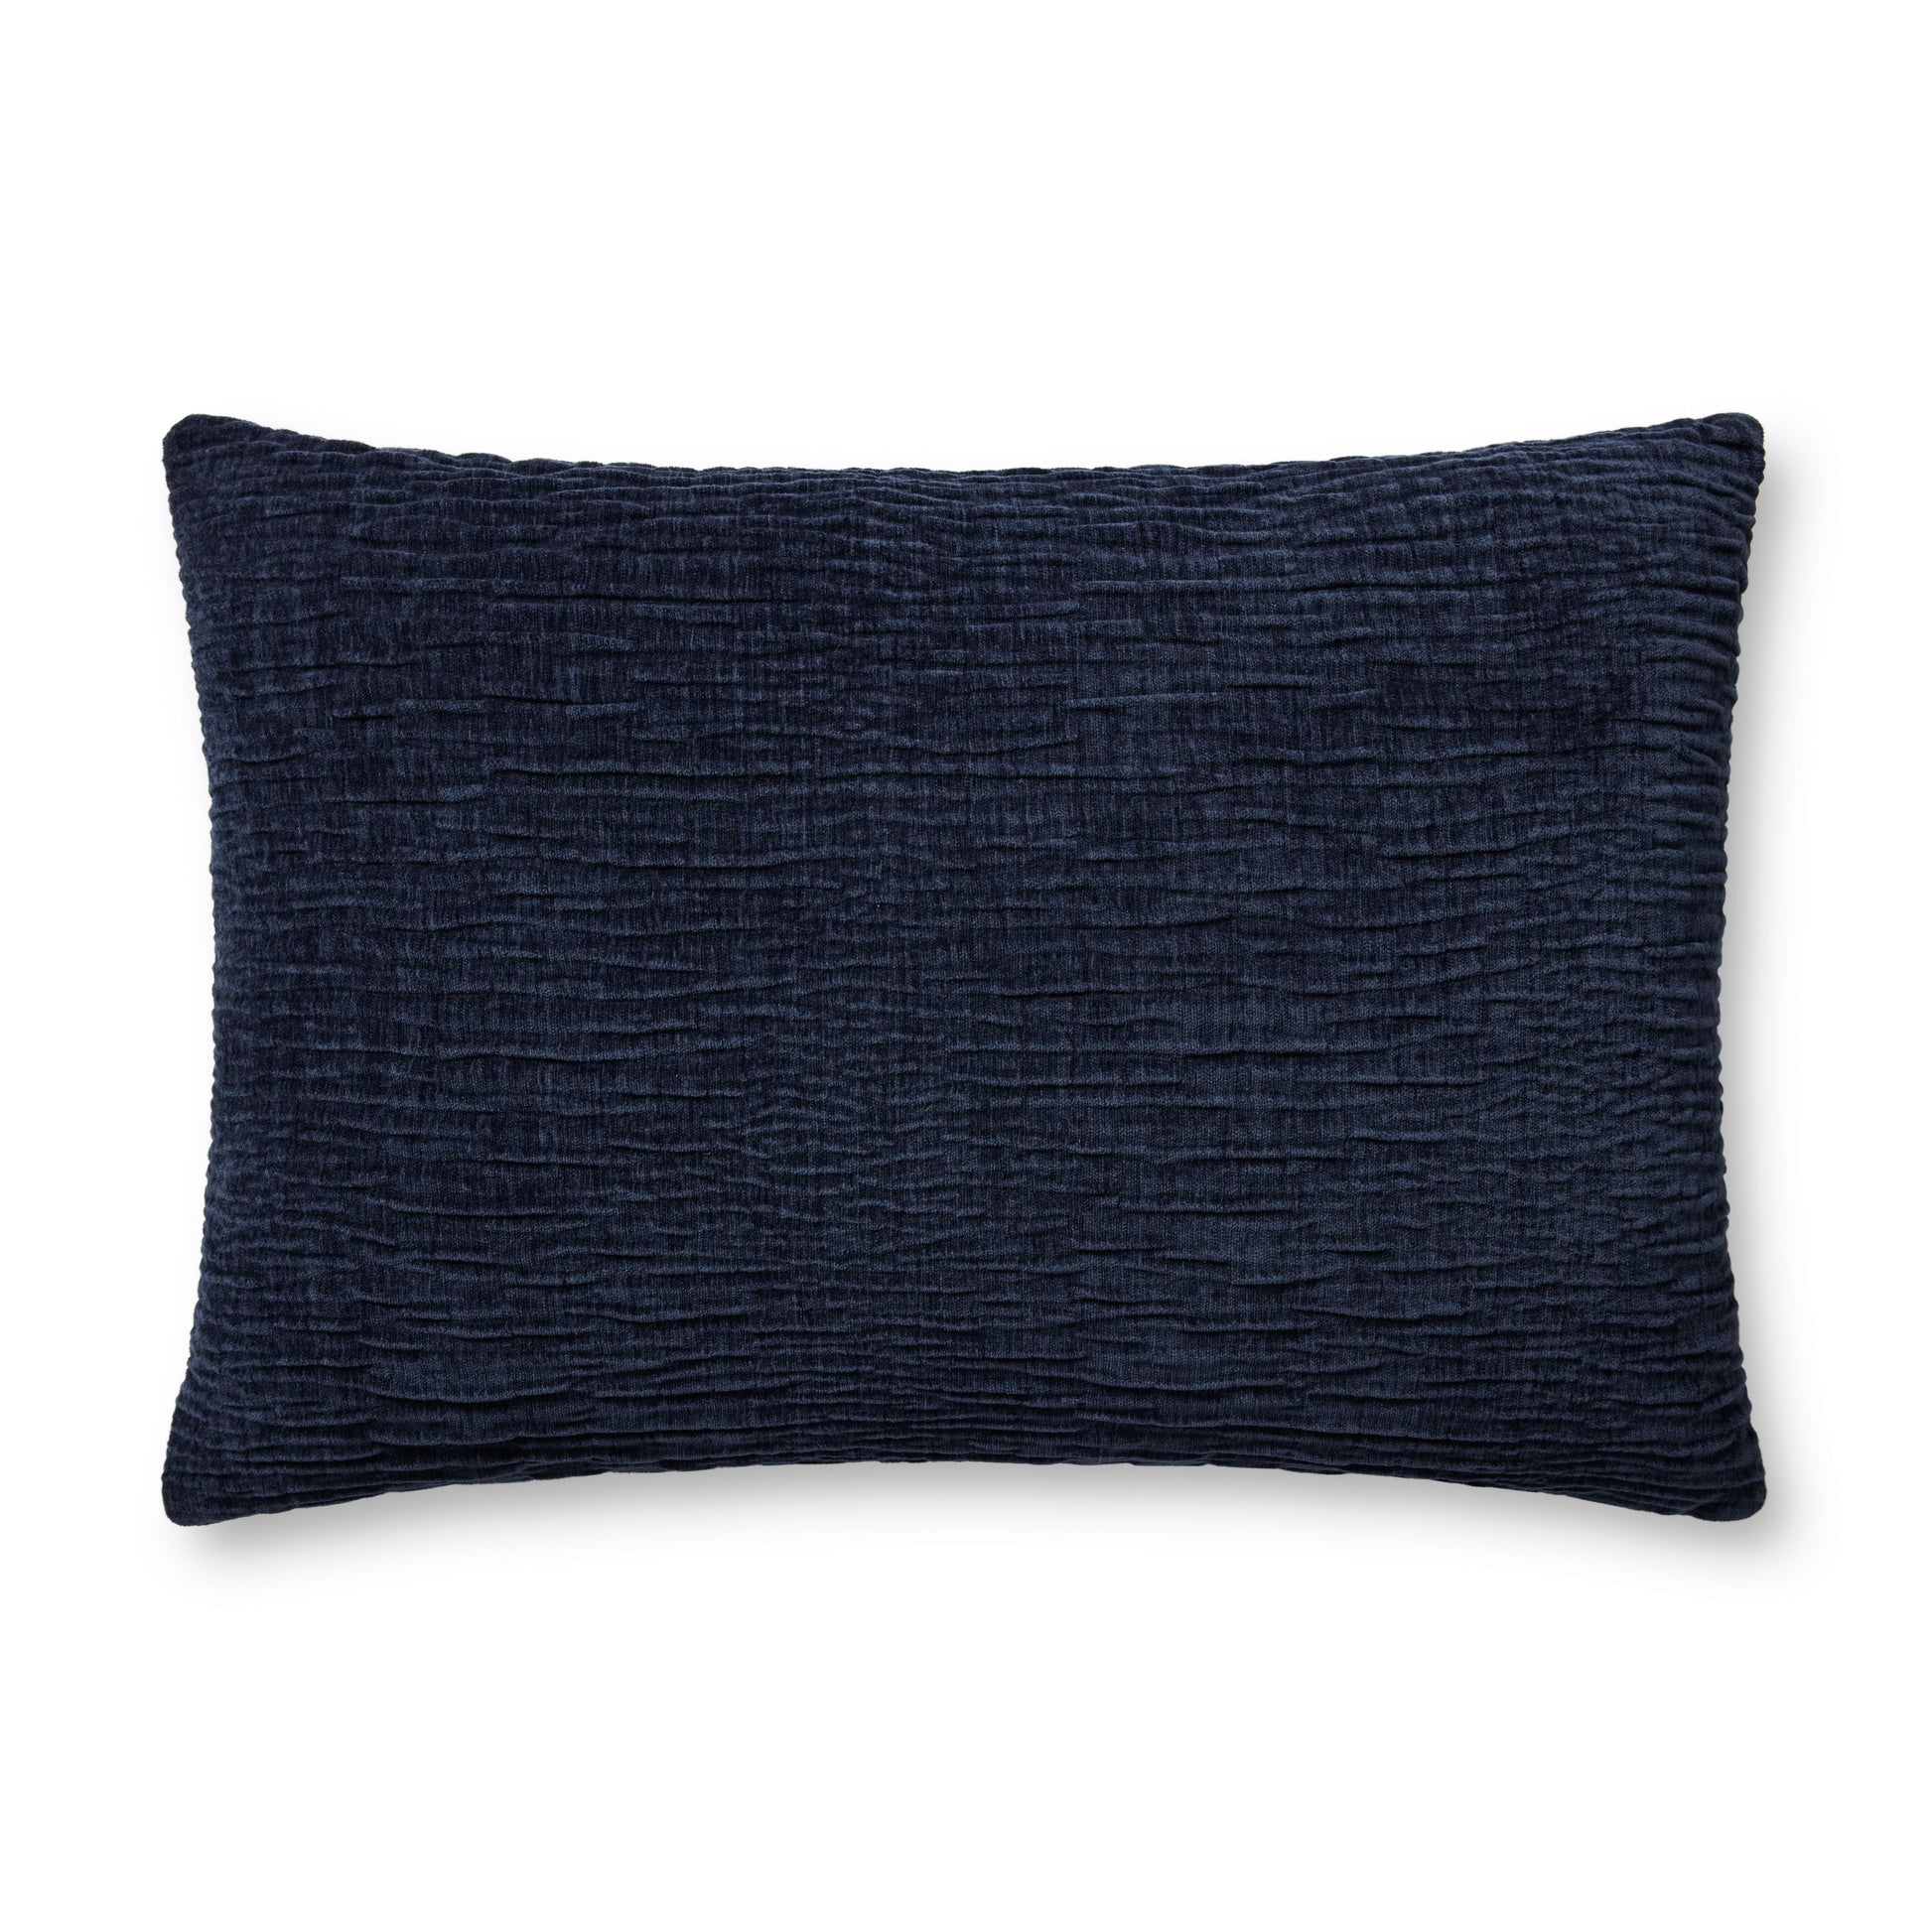 Photo of a pillow;  Navy 16'' x 26'' Cover w/Poly Pillow